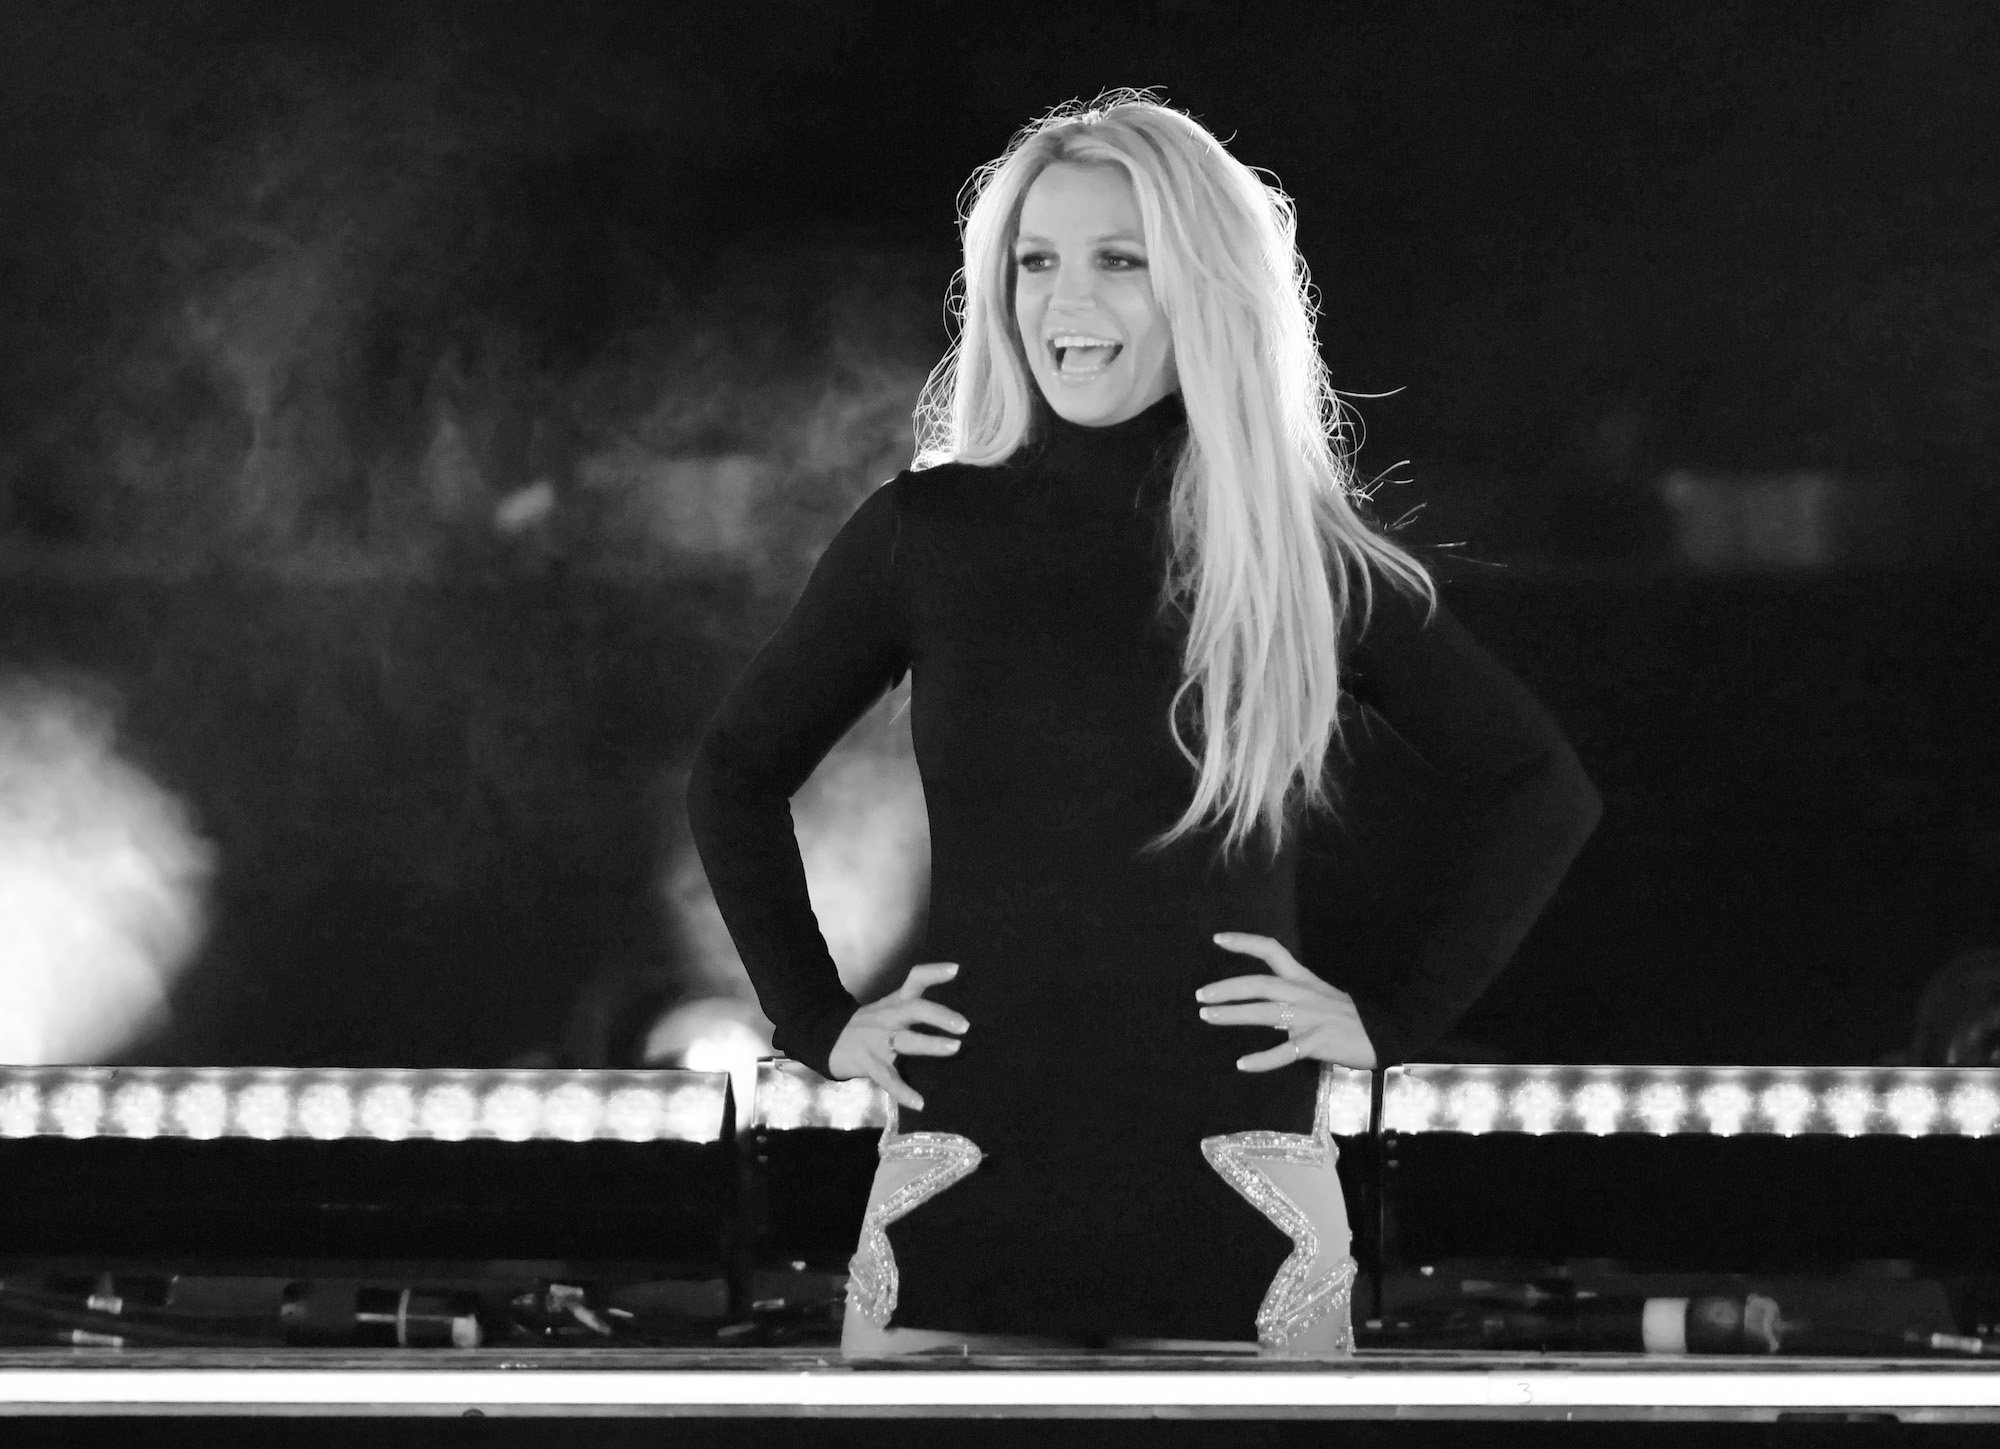 Britney Spears smiling on stage, in black and white